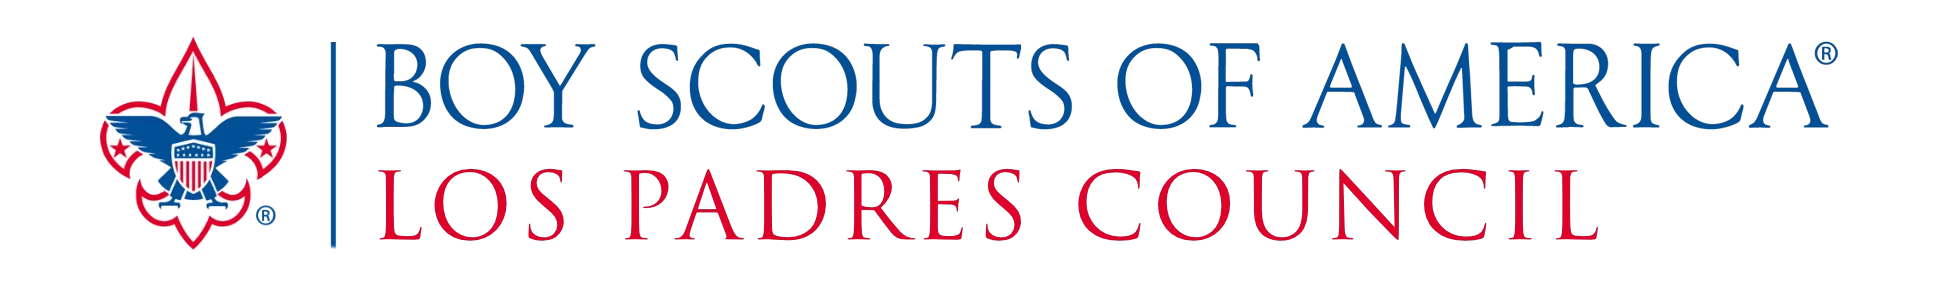 Los Padres Council Boy Scouts of America